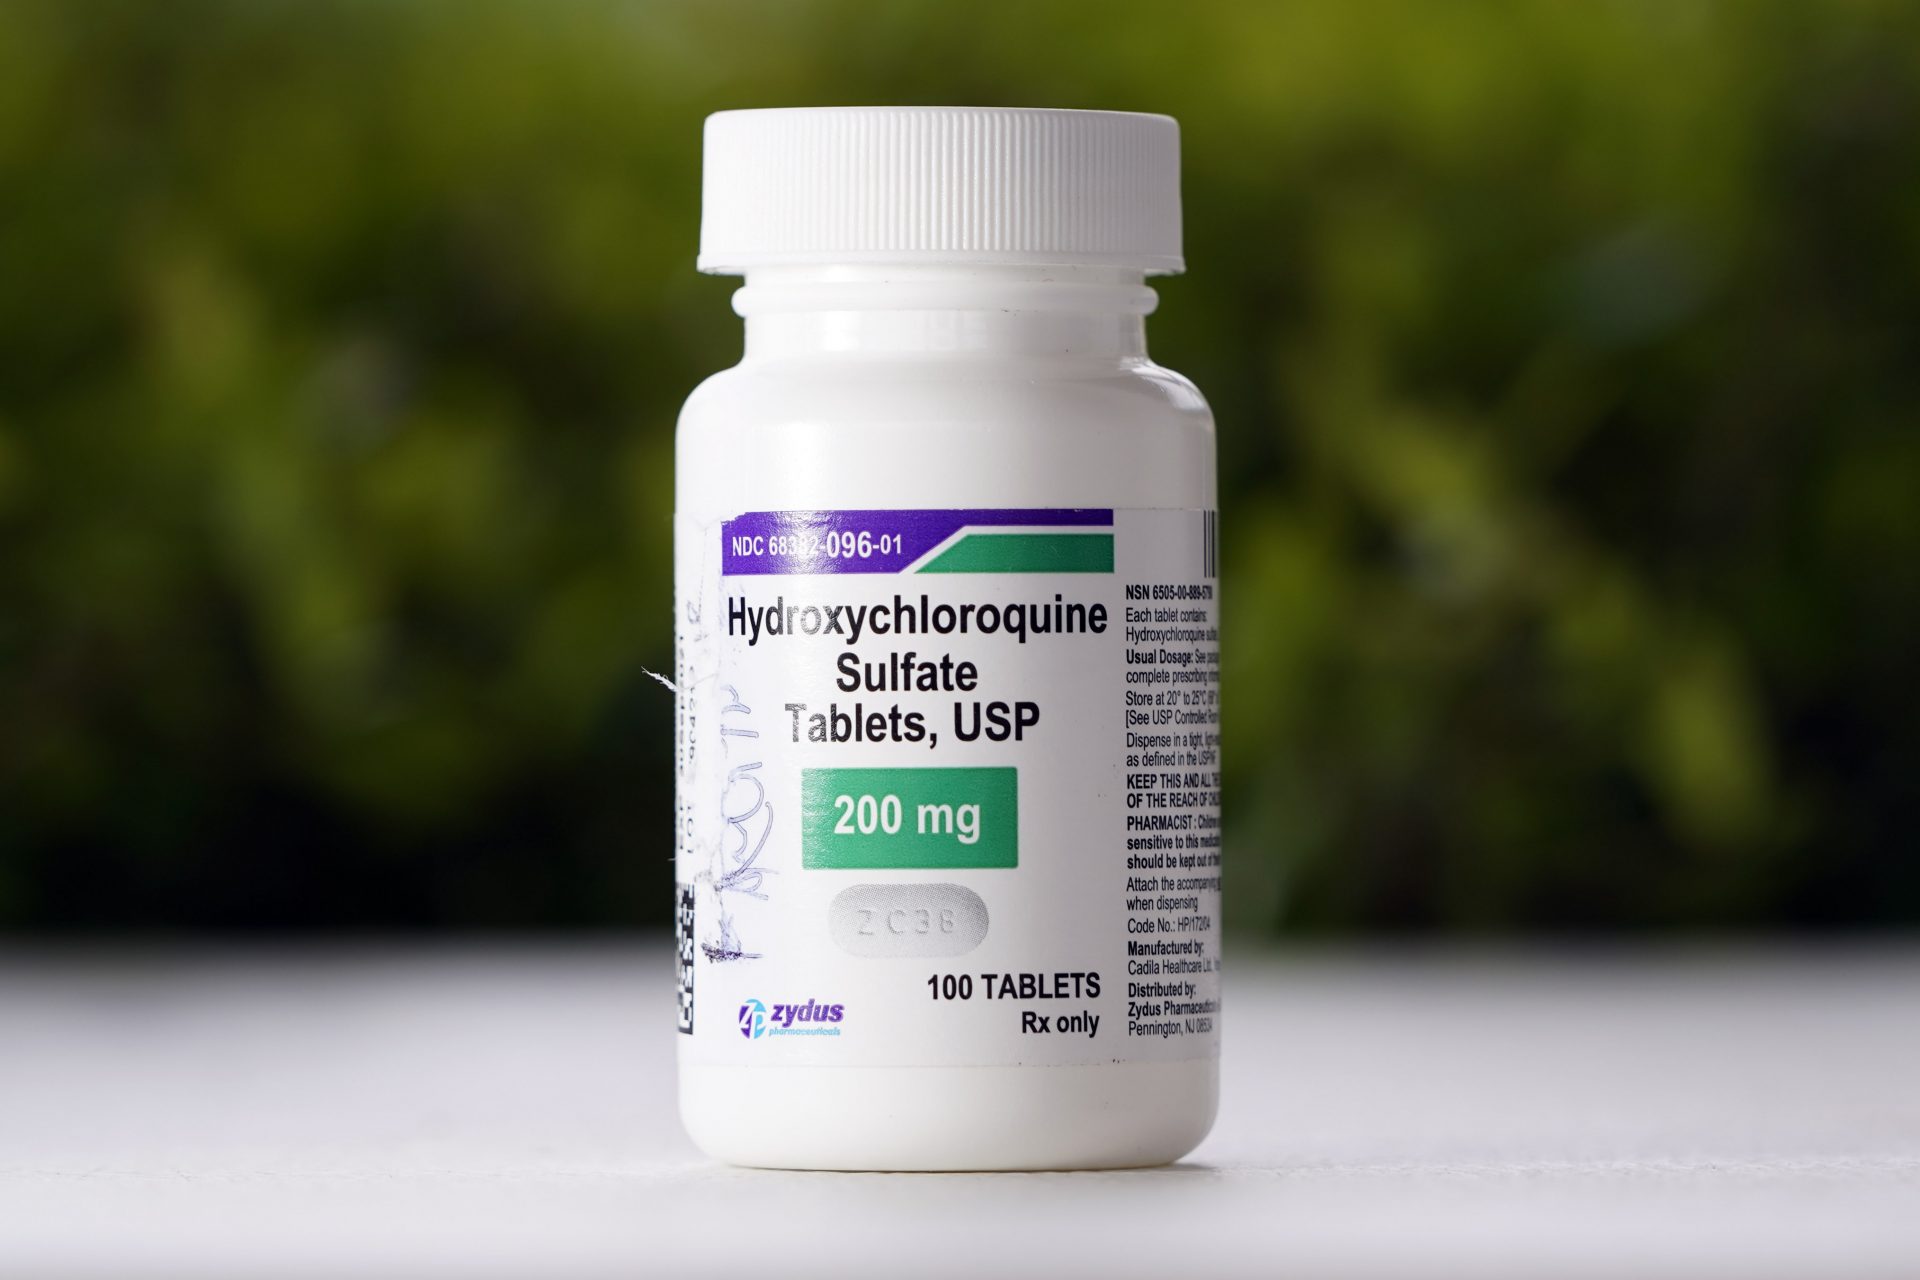 This Tuesday, April 7, 2020 file photo shows a bottle of hydroxychloroquine tablets in Texas City, Texas. On Friday, April 24, 2020, the U.S. Food and Drug Administration warned doctors against prescribing the malaria drug to treat COVID-19 outside of hospitals or research settings.